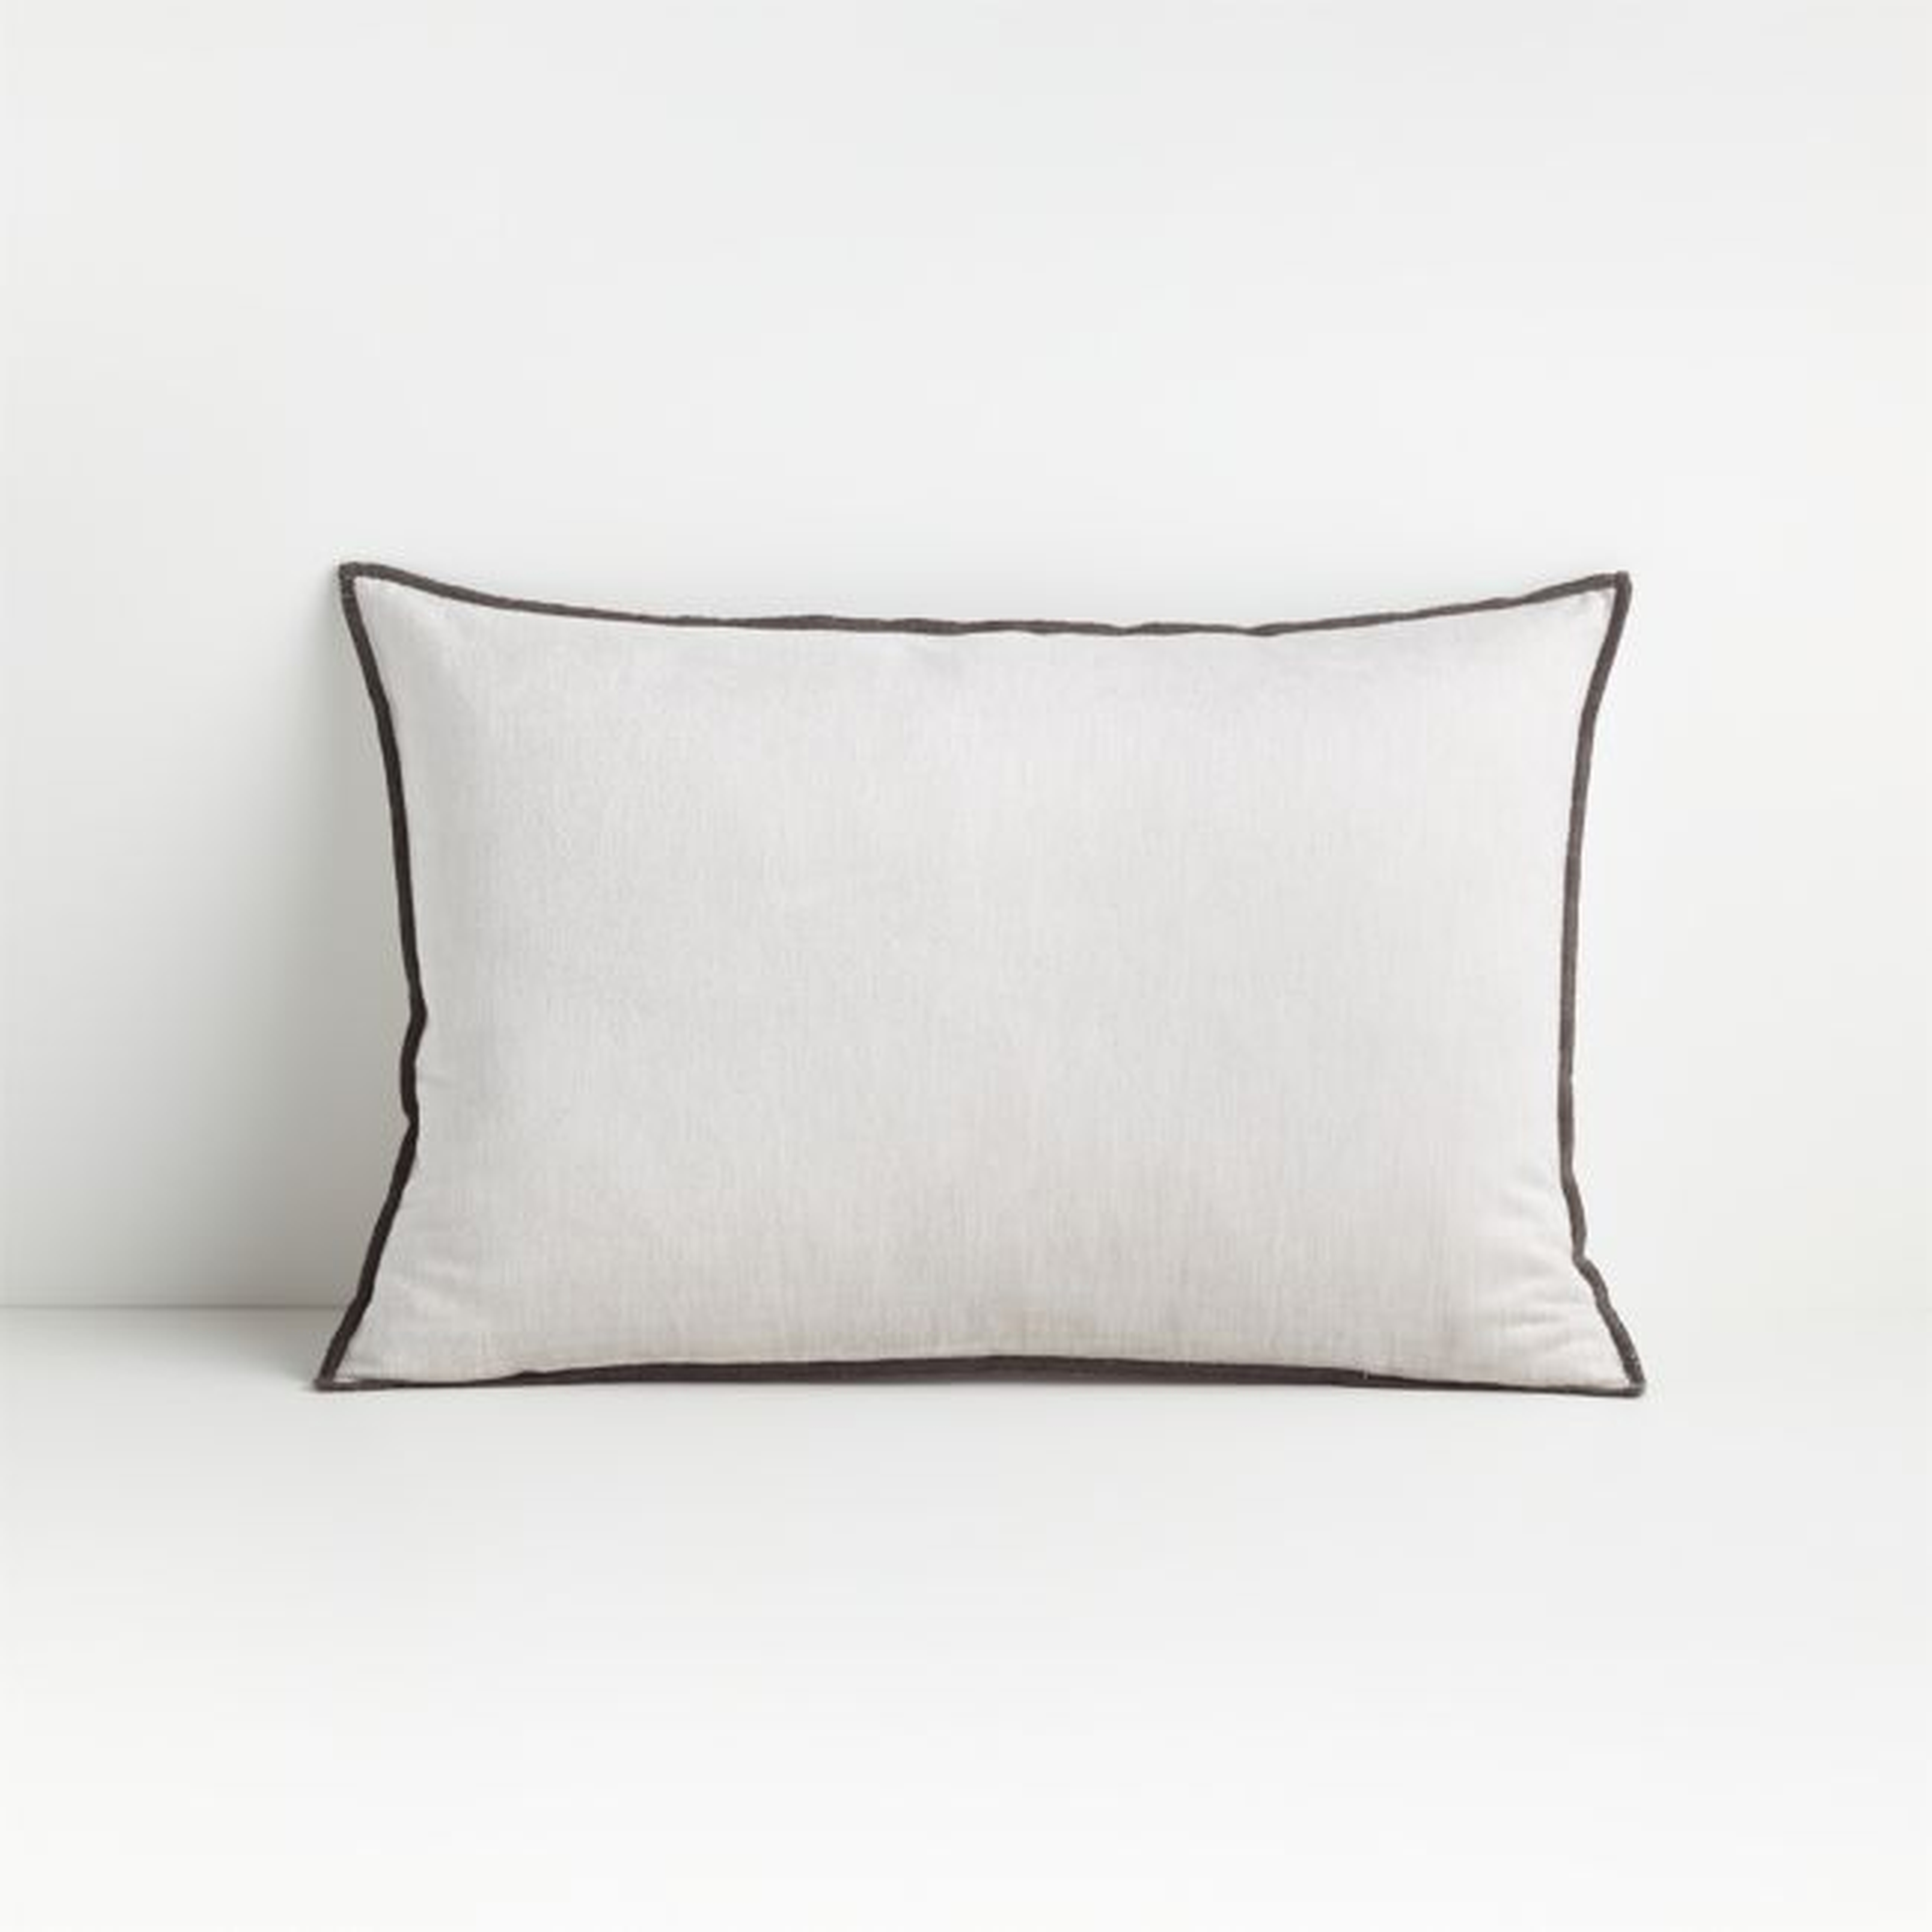 Styria Moonbeam 22"x15" Pillow with Feather-Down Insert - Crate and Barrel